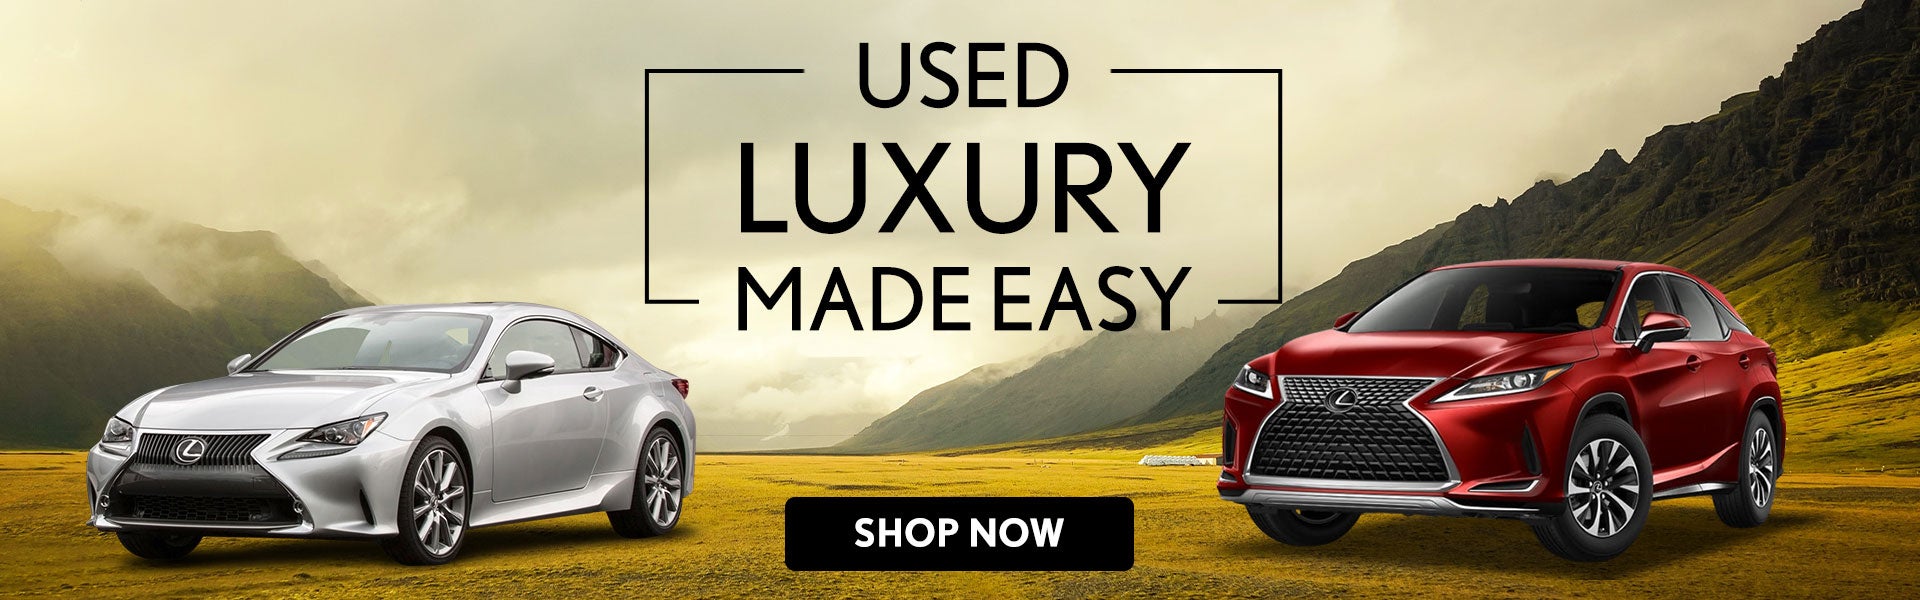 Used Luxury Cars for Sale near South Bend, IN